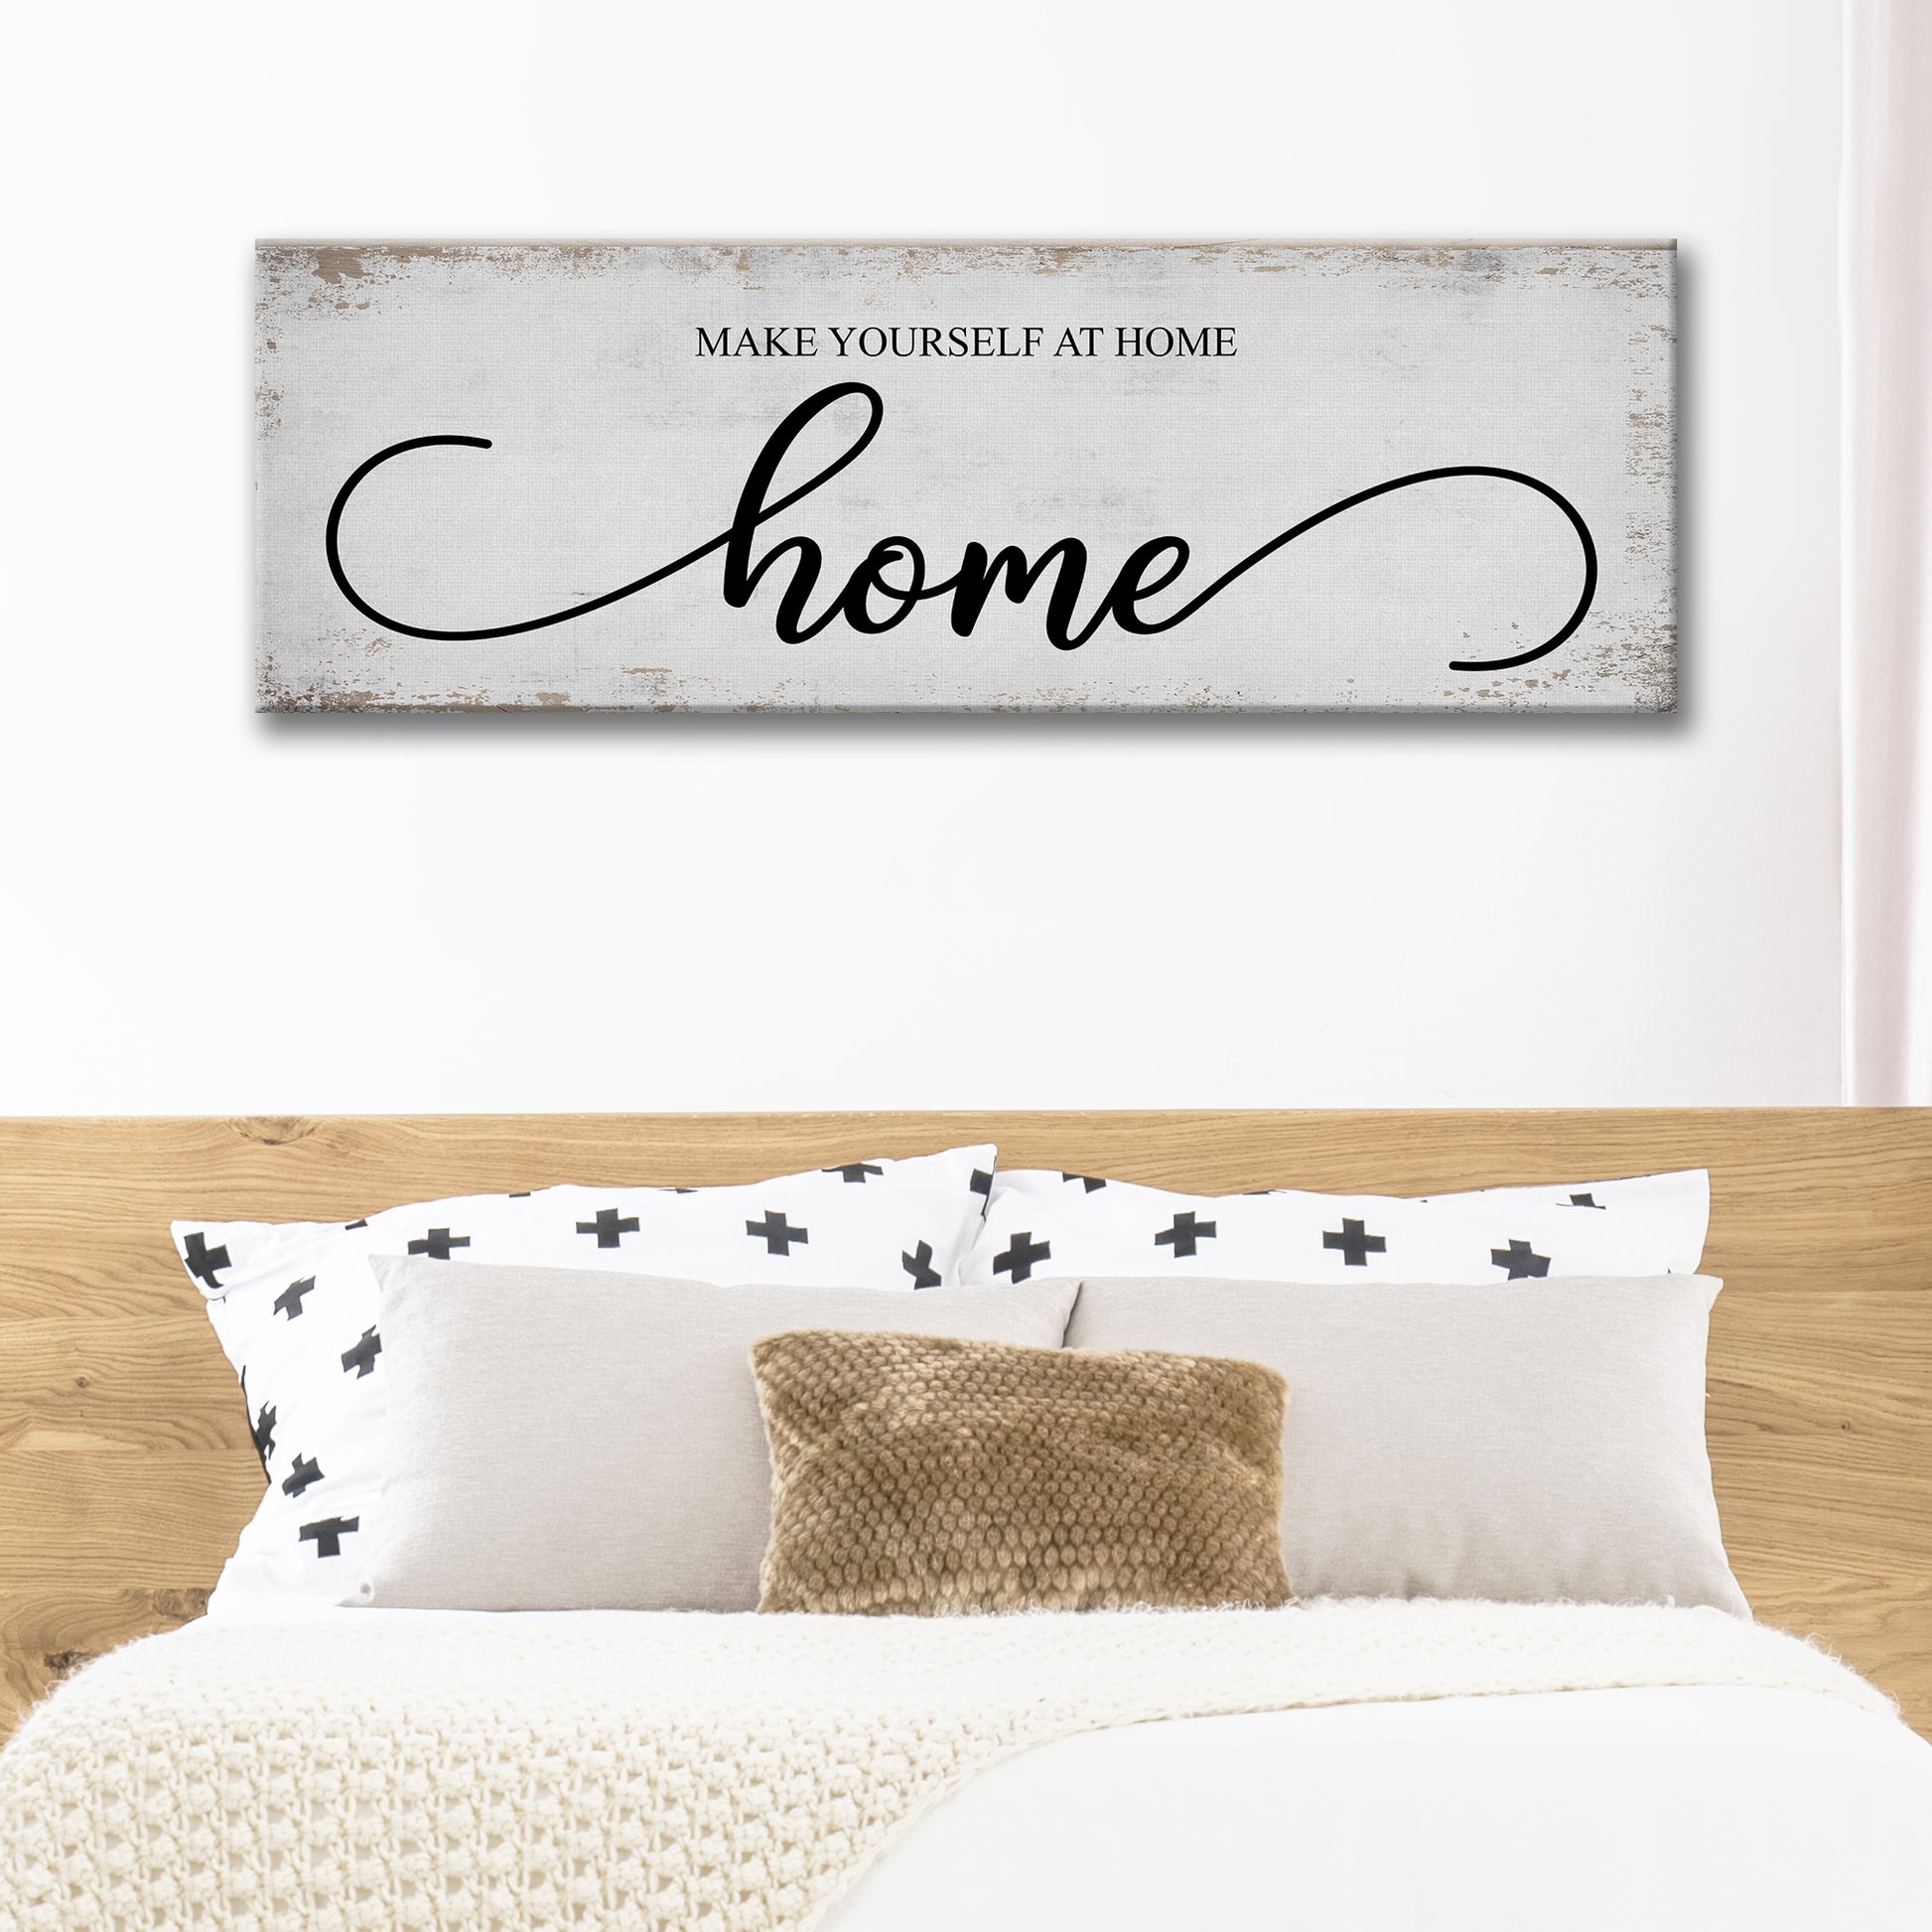 Make Yourself At Home Style 1 - Image by Tailored Canvases